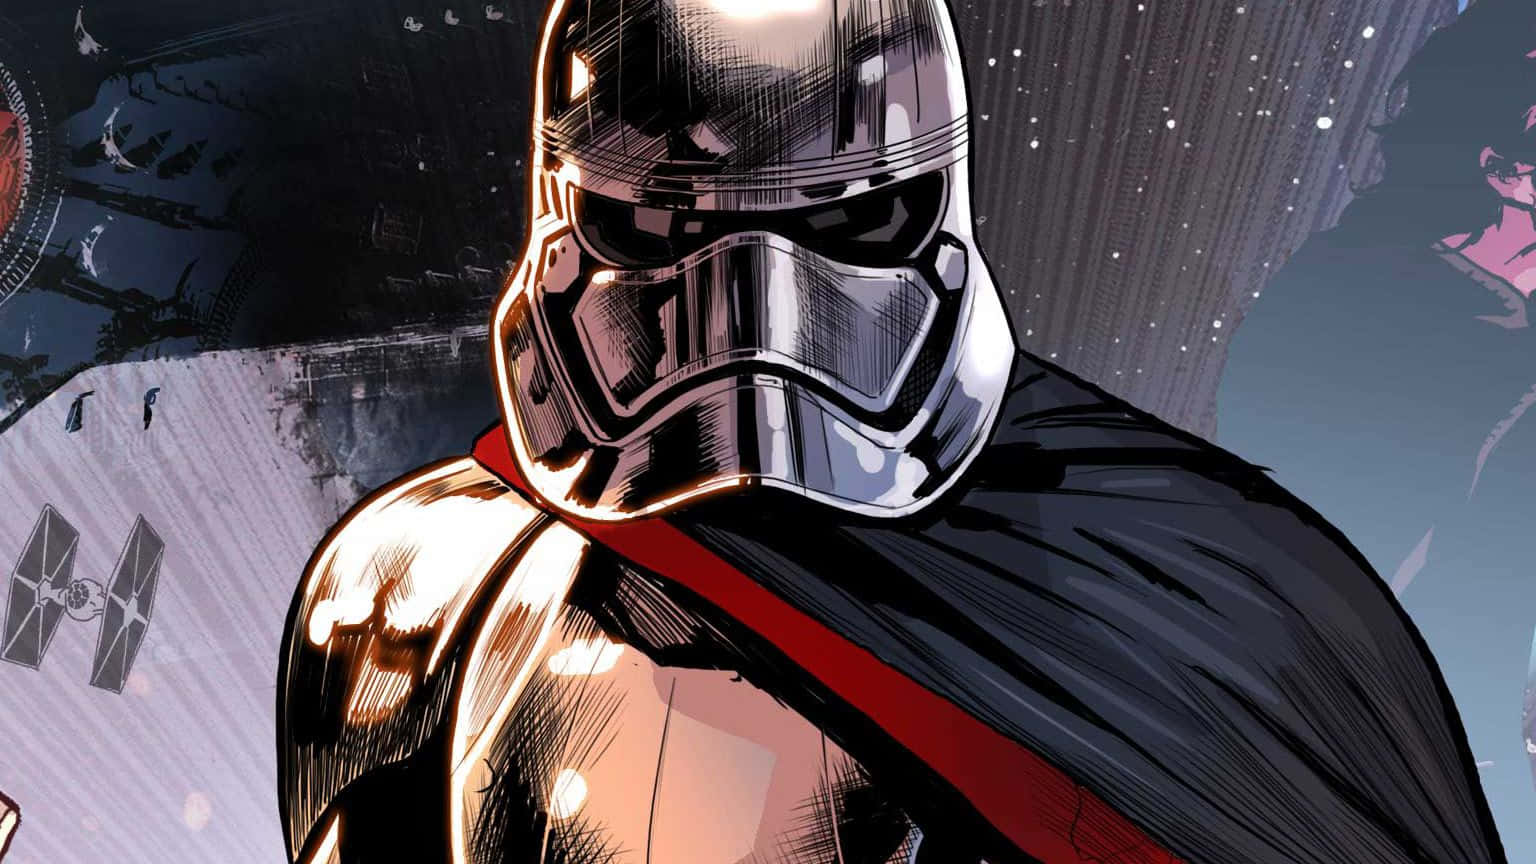 Captain Phasma Standing Tall in Star Wars: The Force Awakens Wallpaper